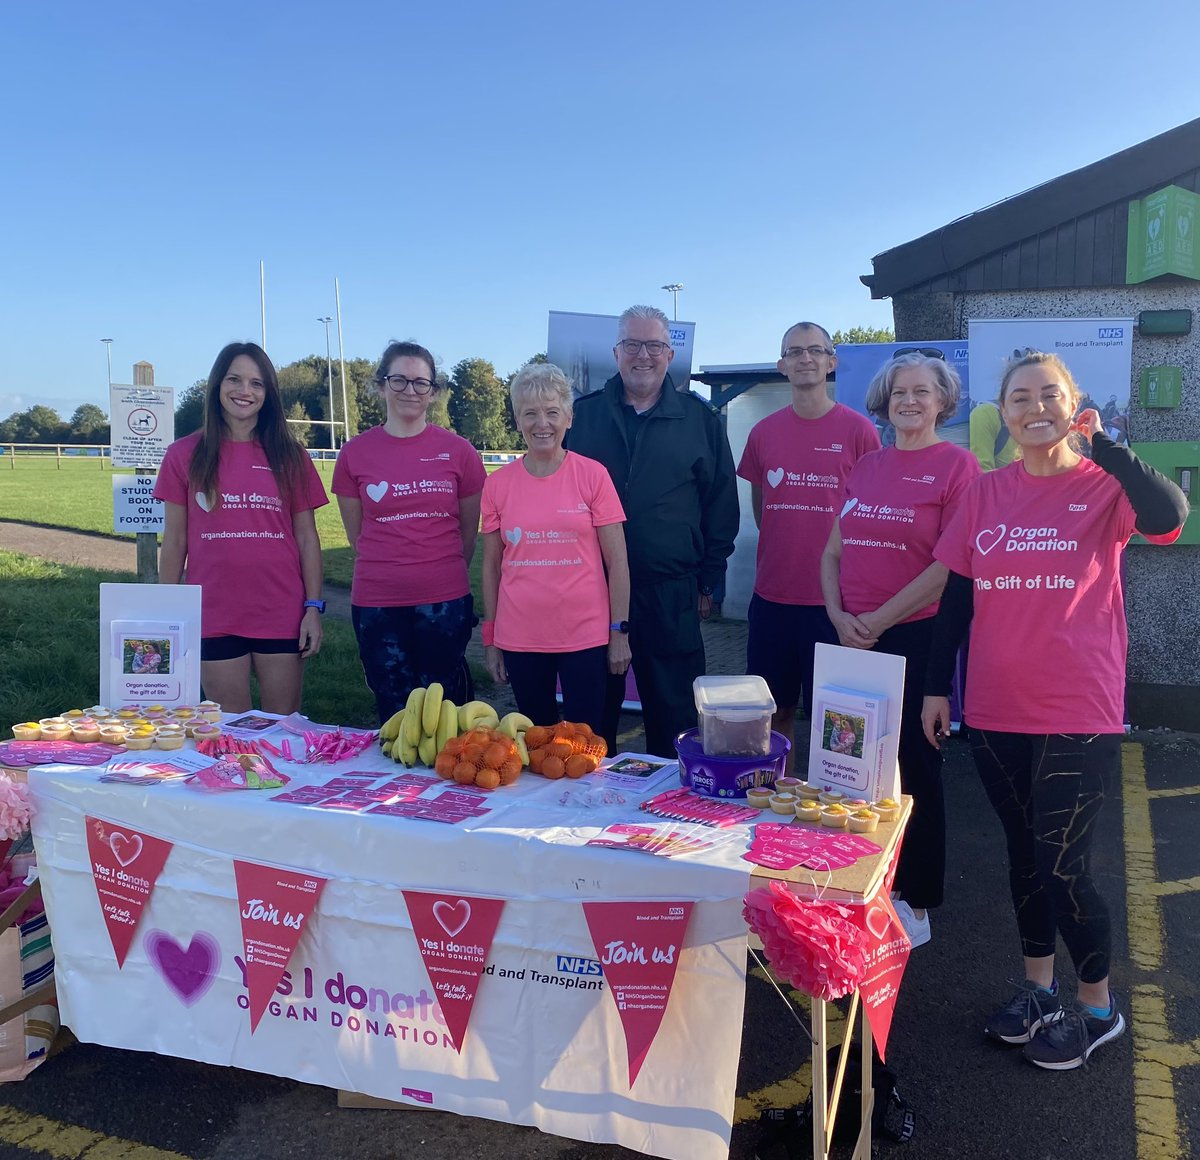 Thank you to Chipping Sodbury @parkrunUK for having us this morning! Encouraging the runners to make their organ donation decision known during #organdonationweek2023 great to start the day with a sunny 5k run too for @R4R2023  @SouthWest_ODT #yesidonate